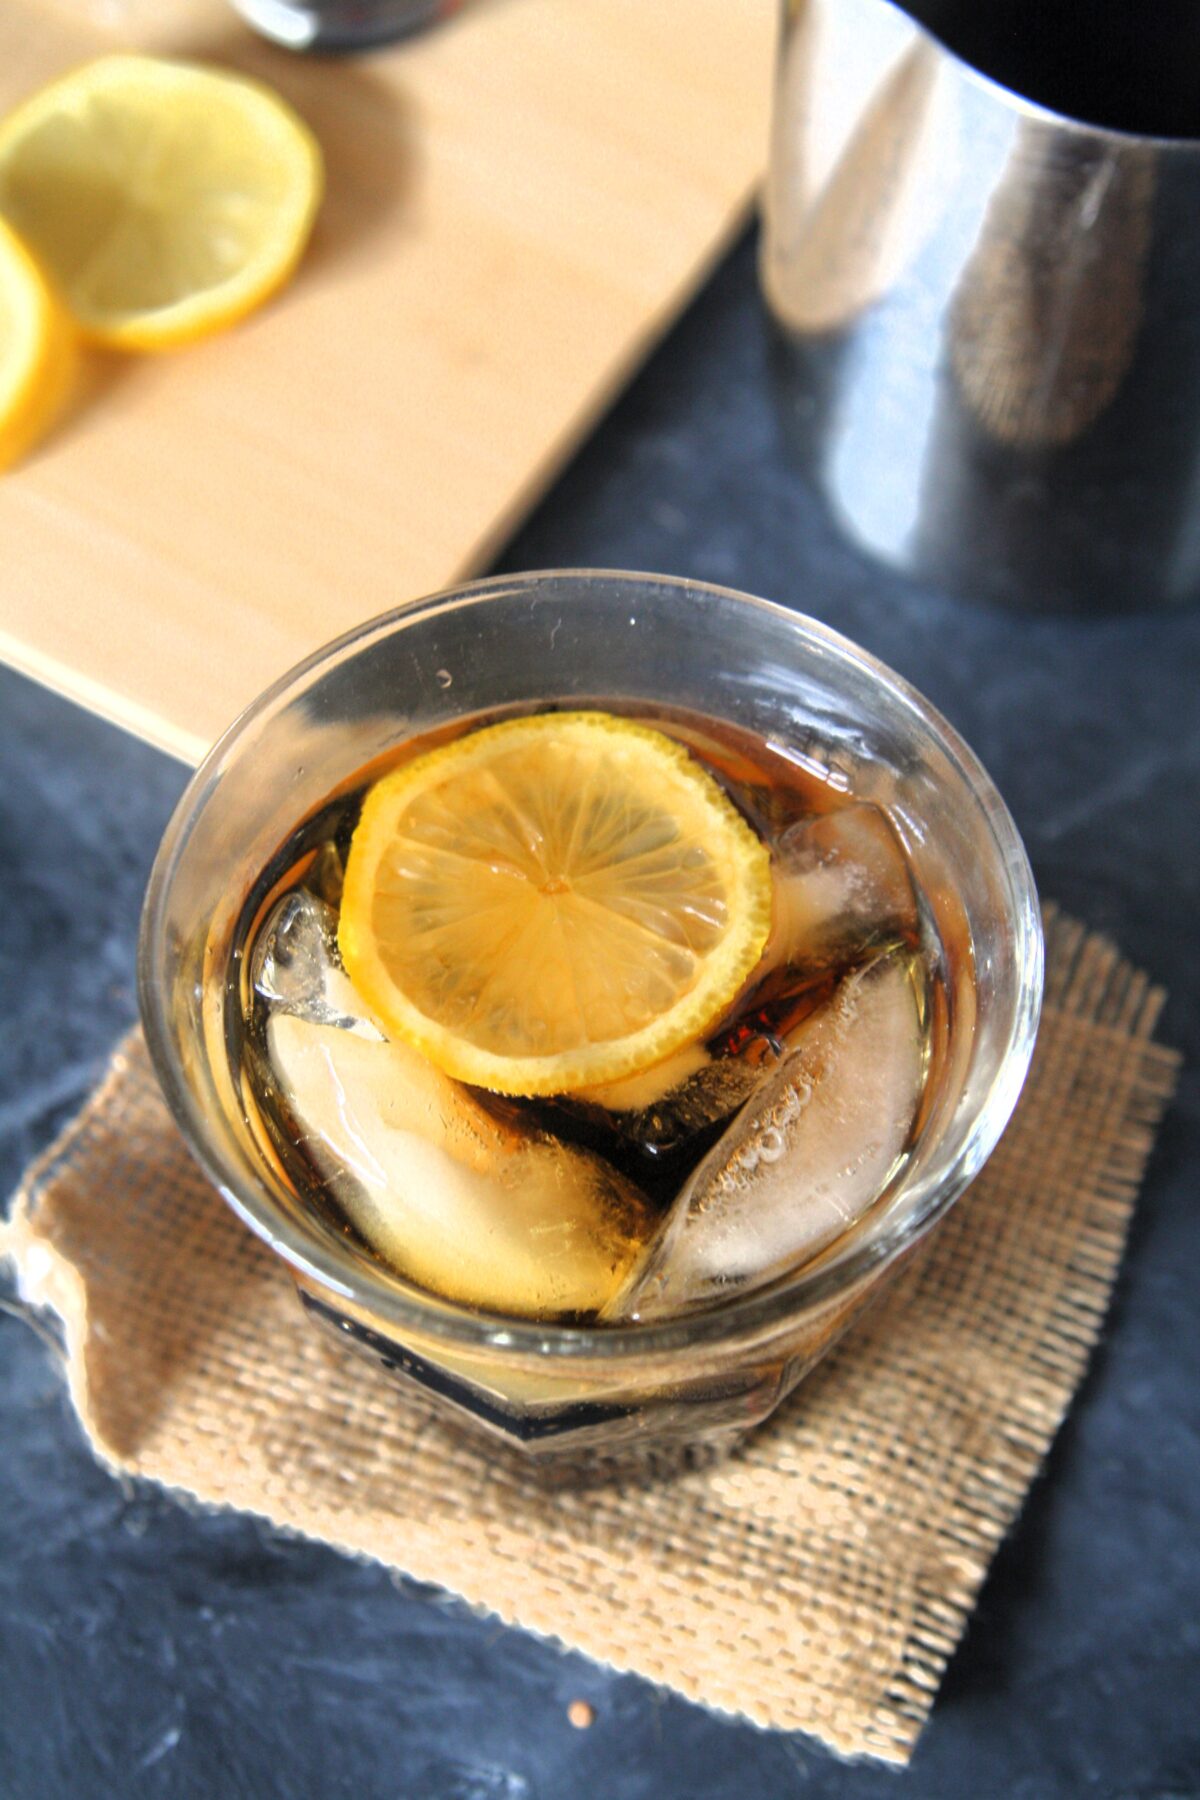 Try this Refreshing Iced Coffee and Lemon Tonic Drink Recipe for a tasty and interesting twist to your regular iced coffee, with a blend of smooth coffee, bitter tonic, and zesty lemon!